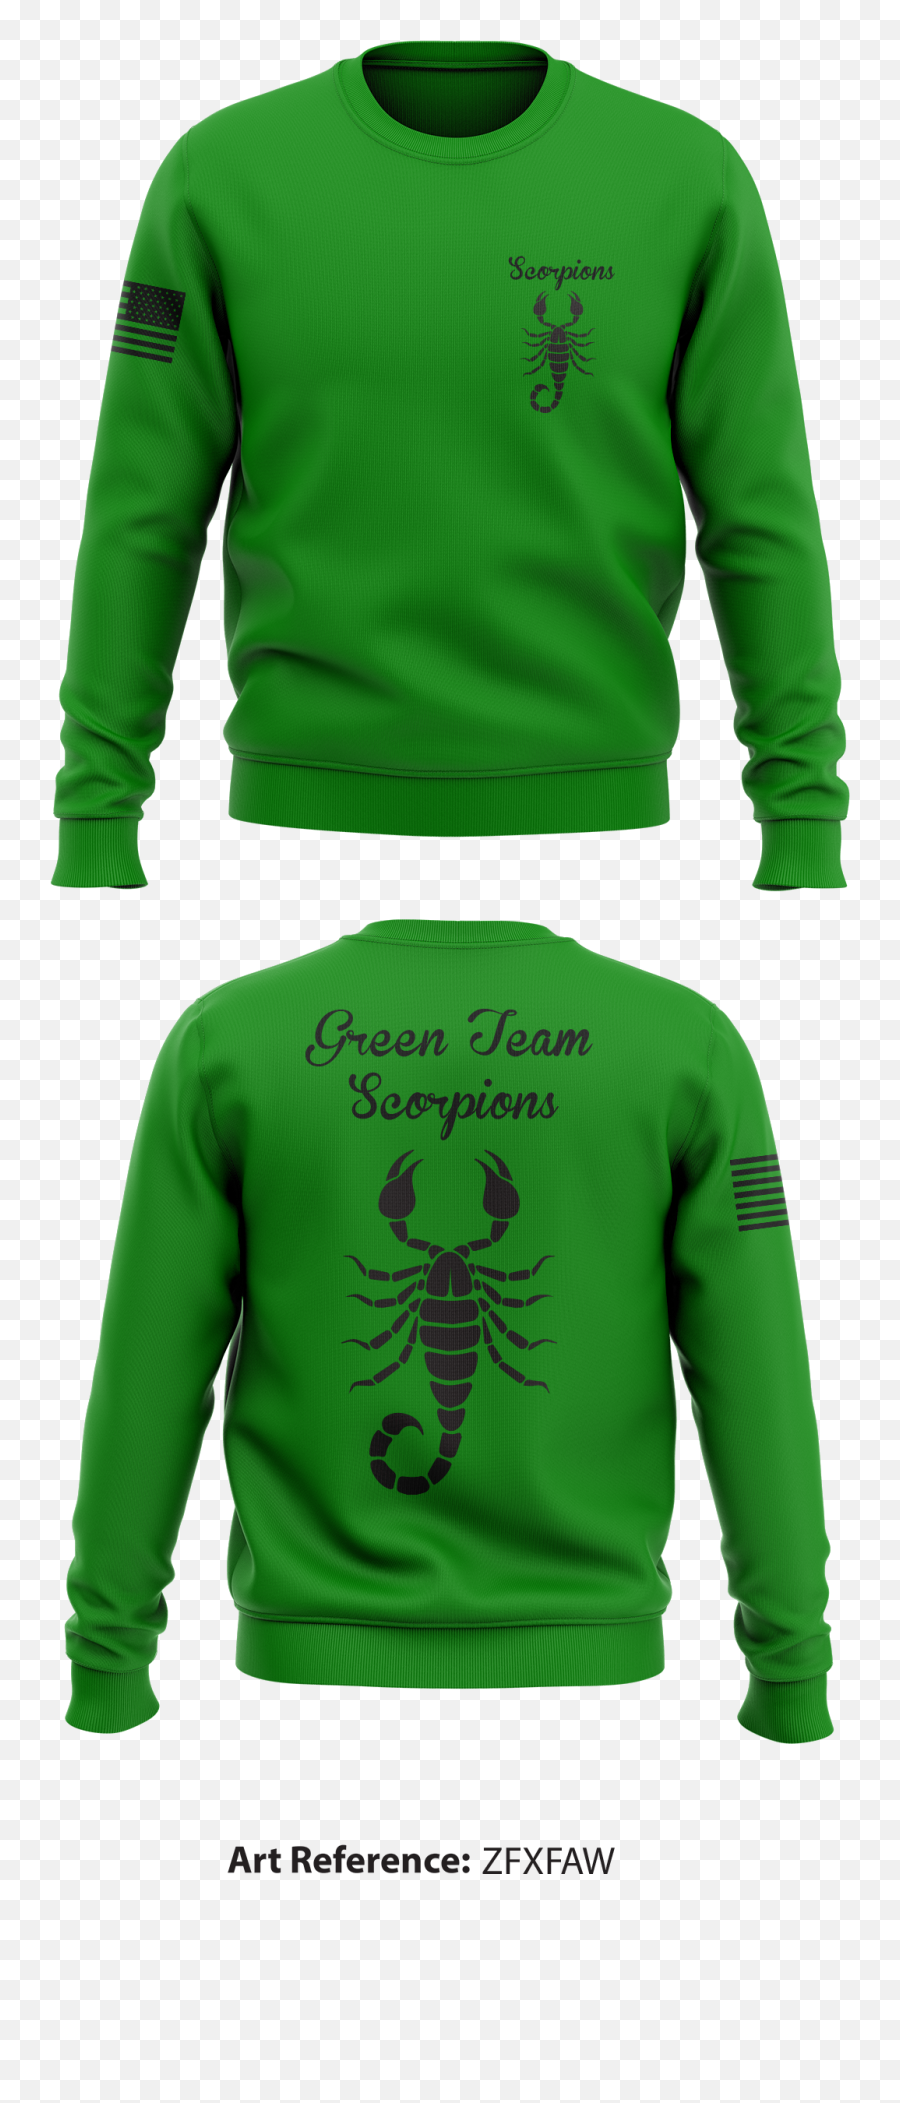 Green Team Scorpions Store 1 Crew Neck - 5th Special Forces Group Shirt Emoji,Scorpions Logo